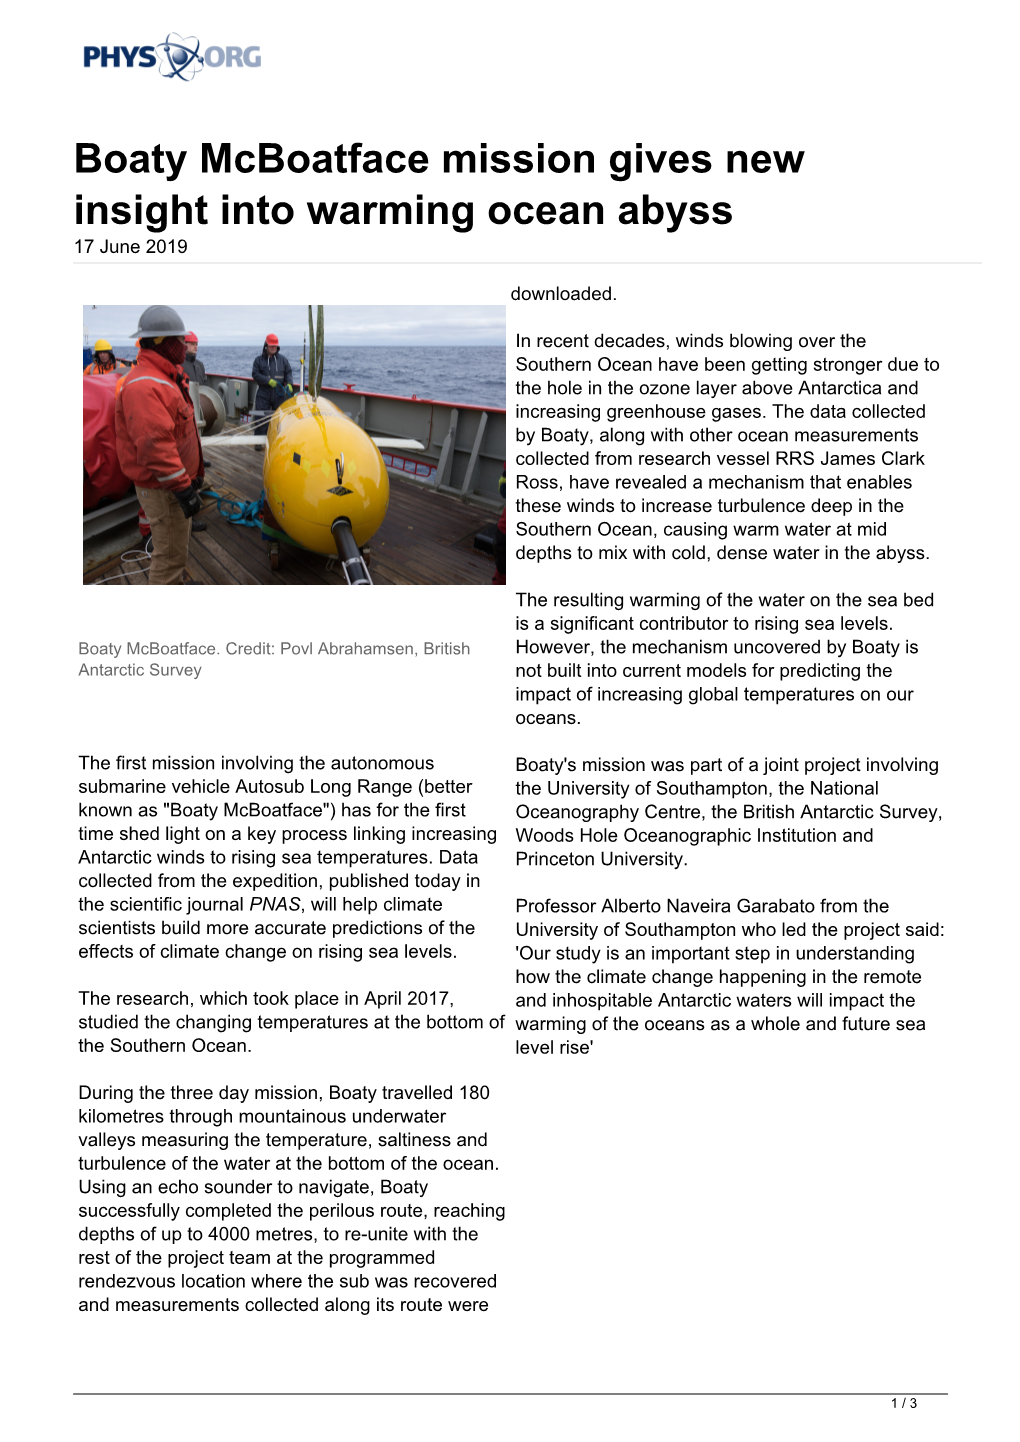 Boaty Mcboatface Mission Gives New Insight Into Warming Ocean Abyss 17 June 2019